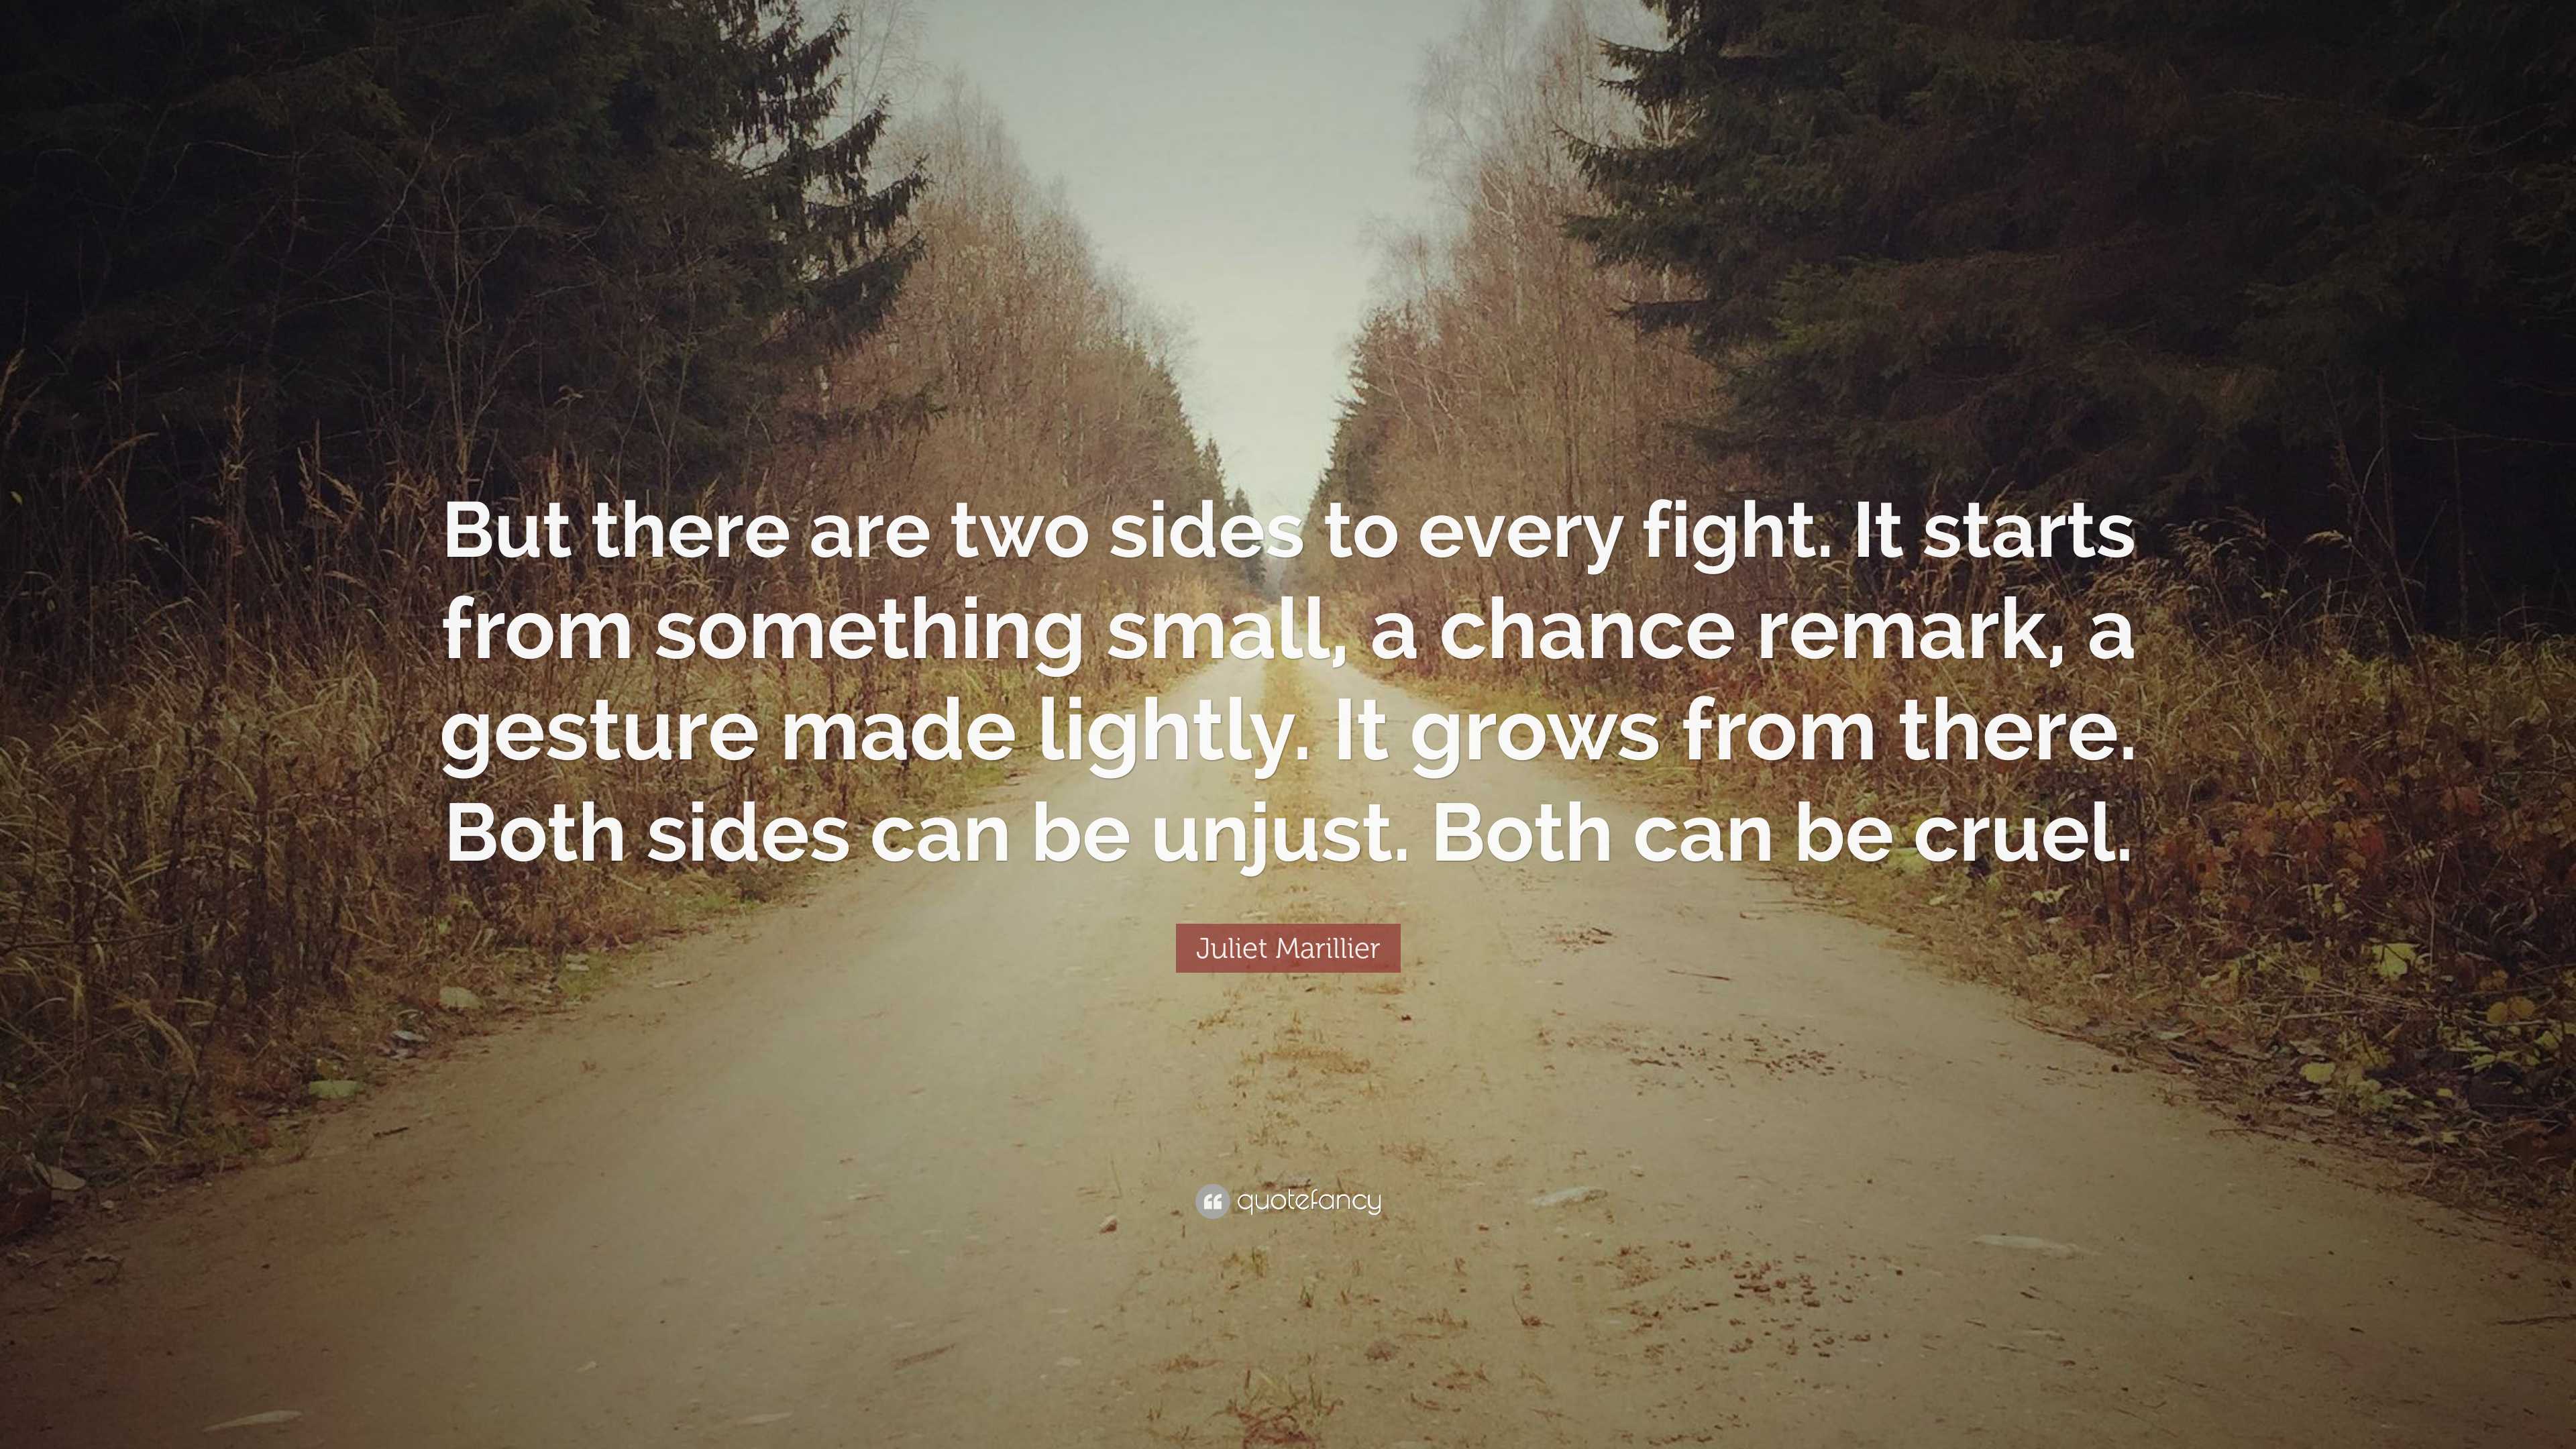 https://quotefancy.com/media/wallpaper/3840x2160/7890930-Juliet-Marillier-Quote-But-there-are-two-sides-to-every-fight-It.jpg